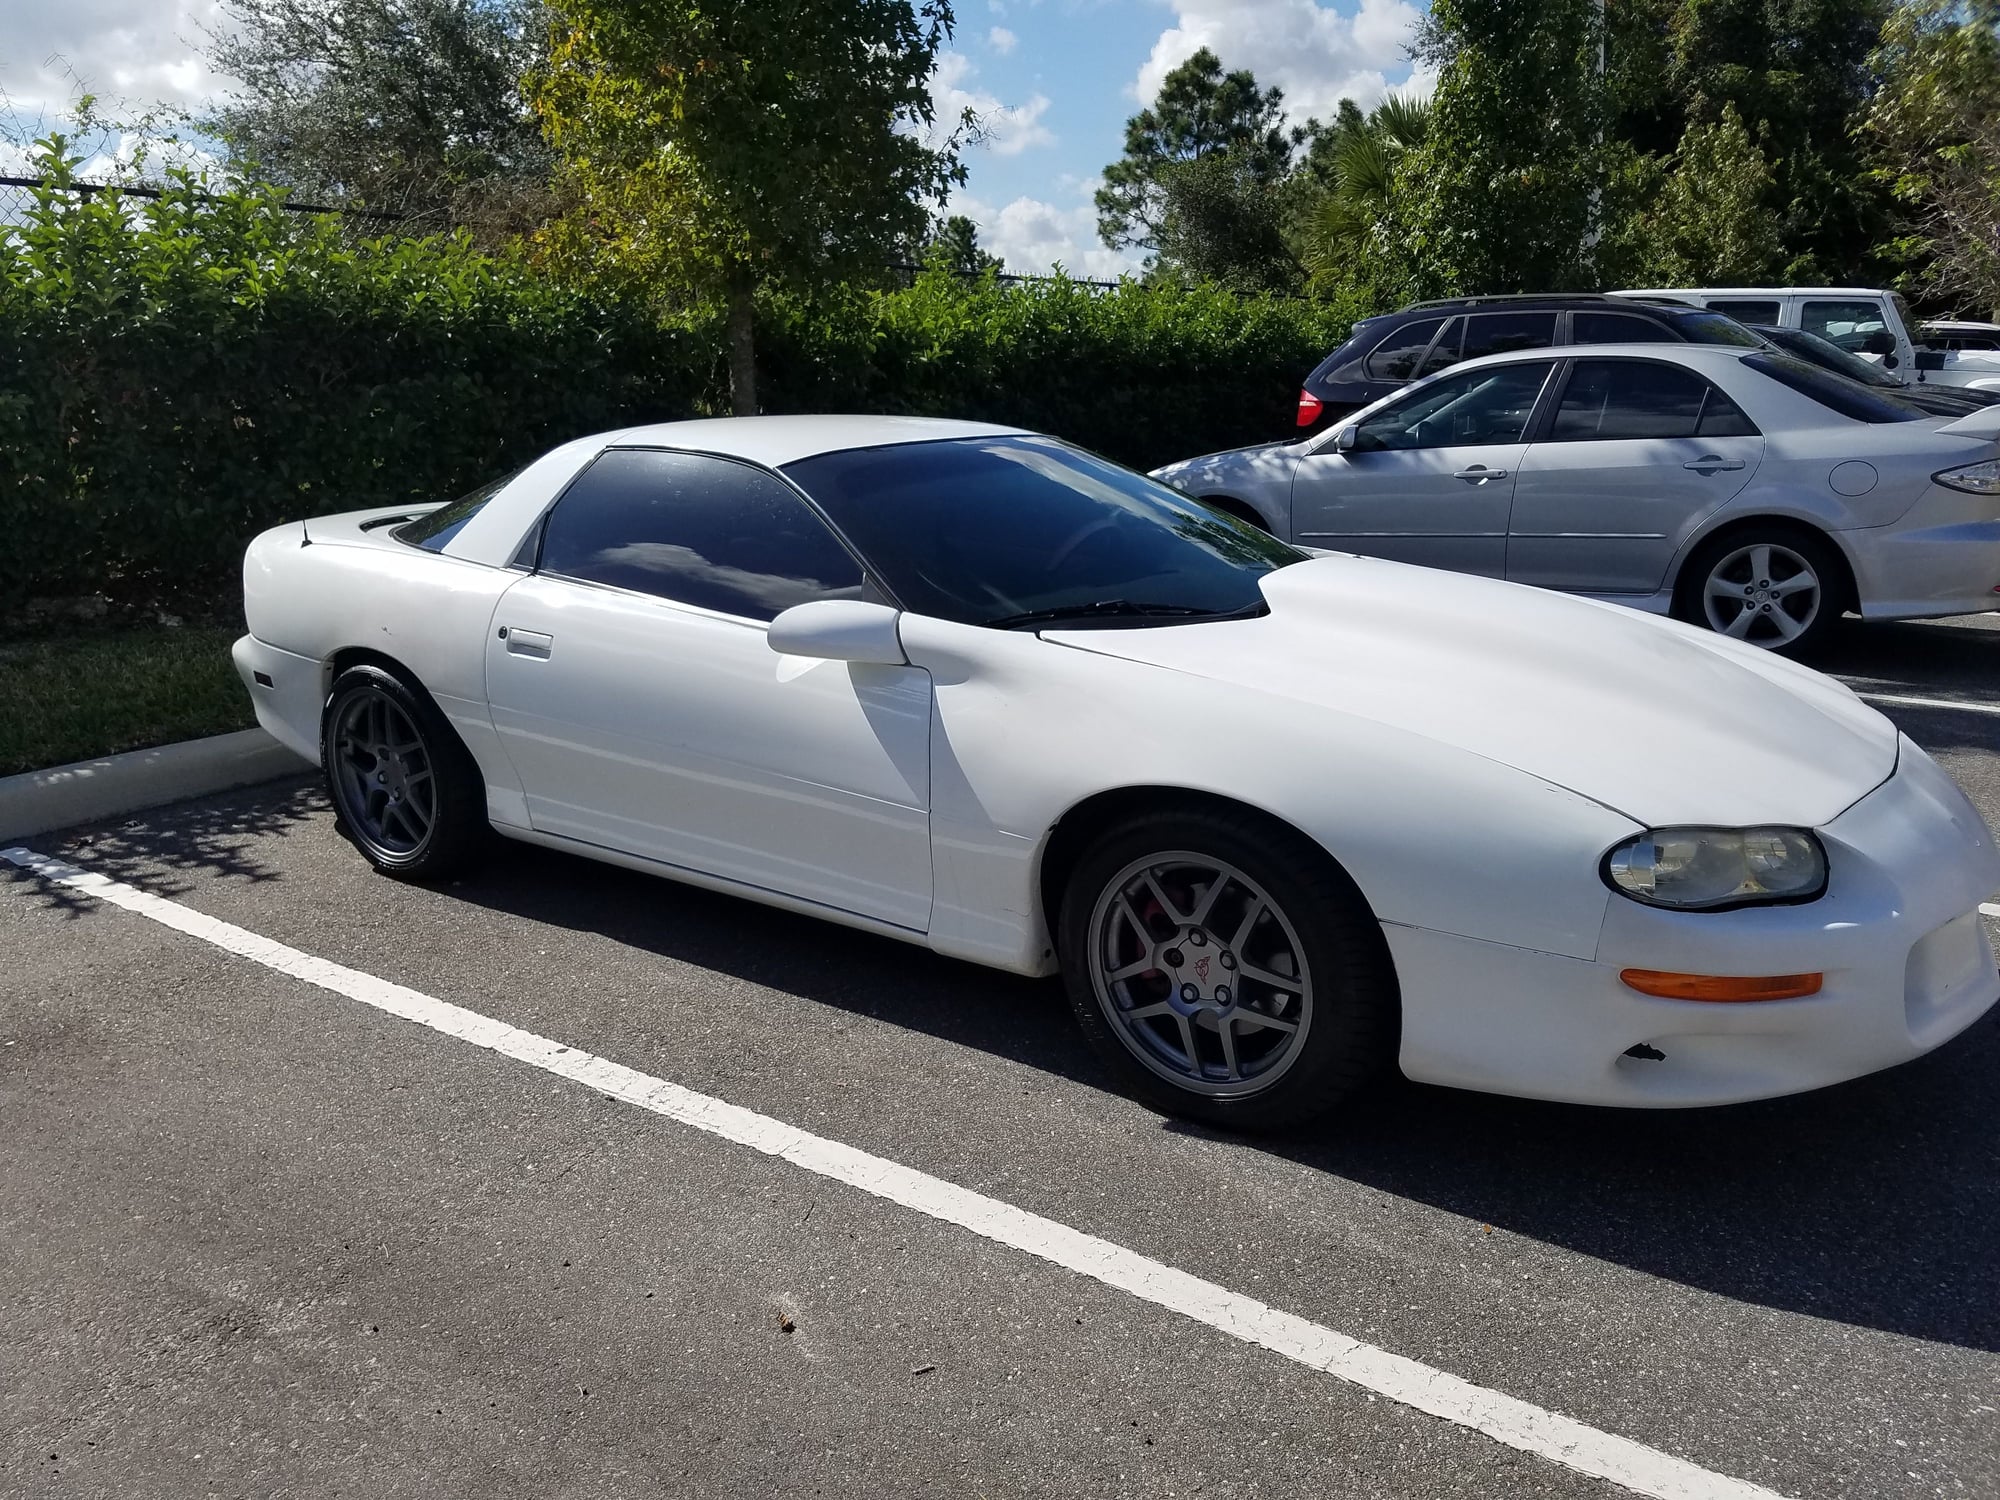 2000 Chevrolet Camaro - B4c code Z28 - Used - VIN 2G1FP22G0Y2141021 - 123,000 Miles - 8 cyl - 2WD - Automatic - Coupe - White - Orlando, FL 32819, United States